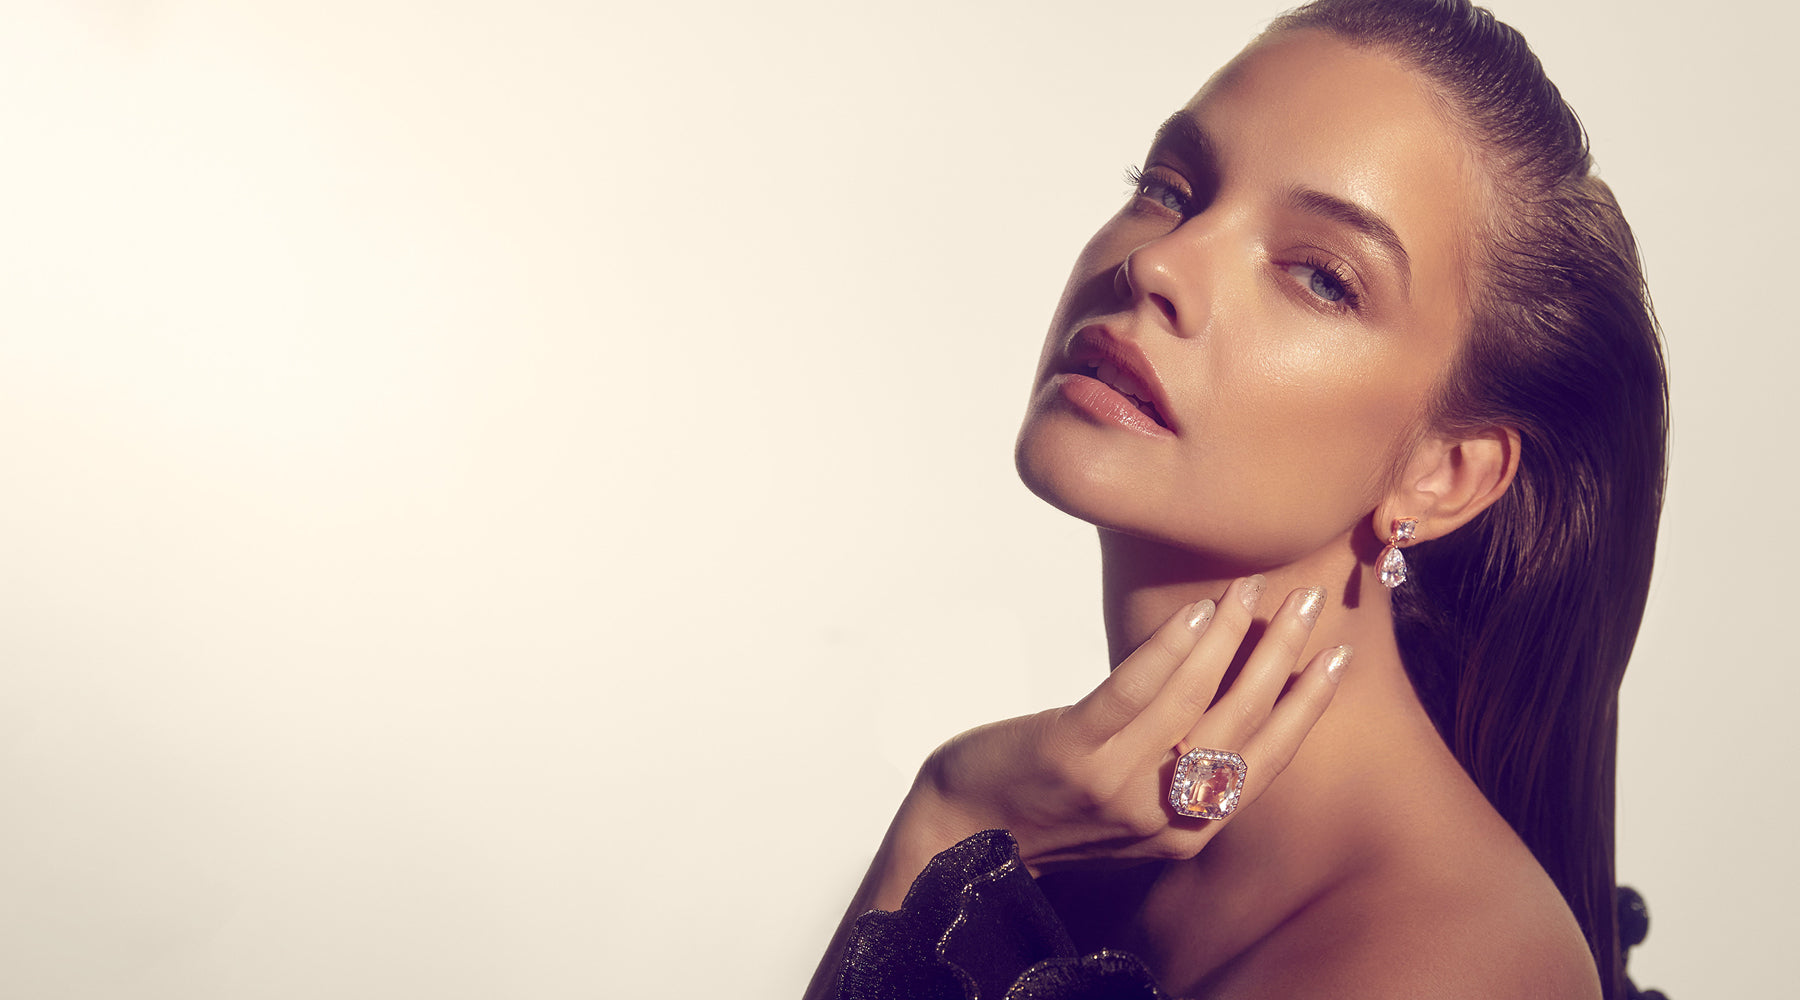 Judith Leiber Launches New 700-Piece Jewelry Collection at Macy's and Online